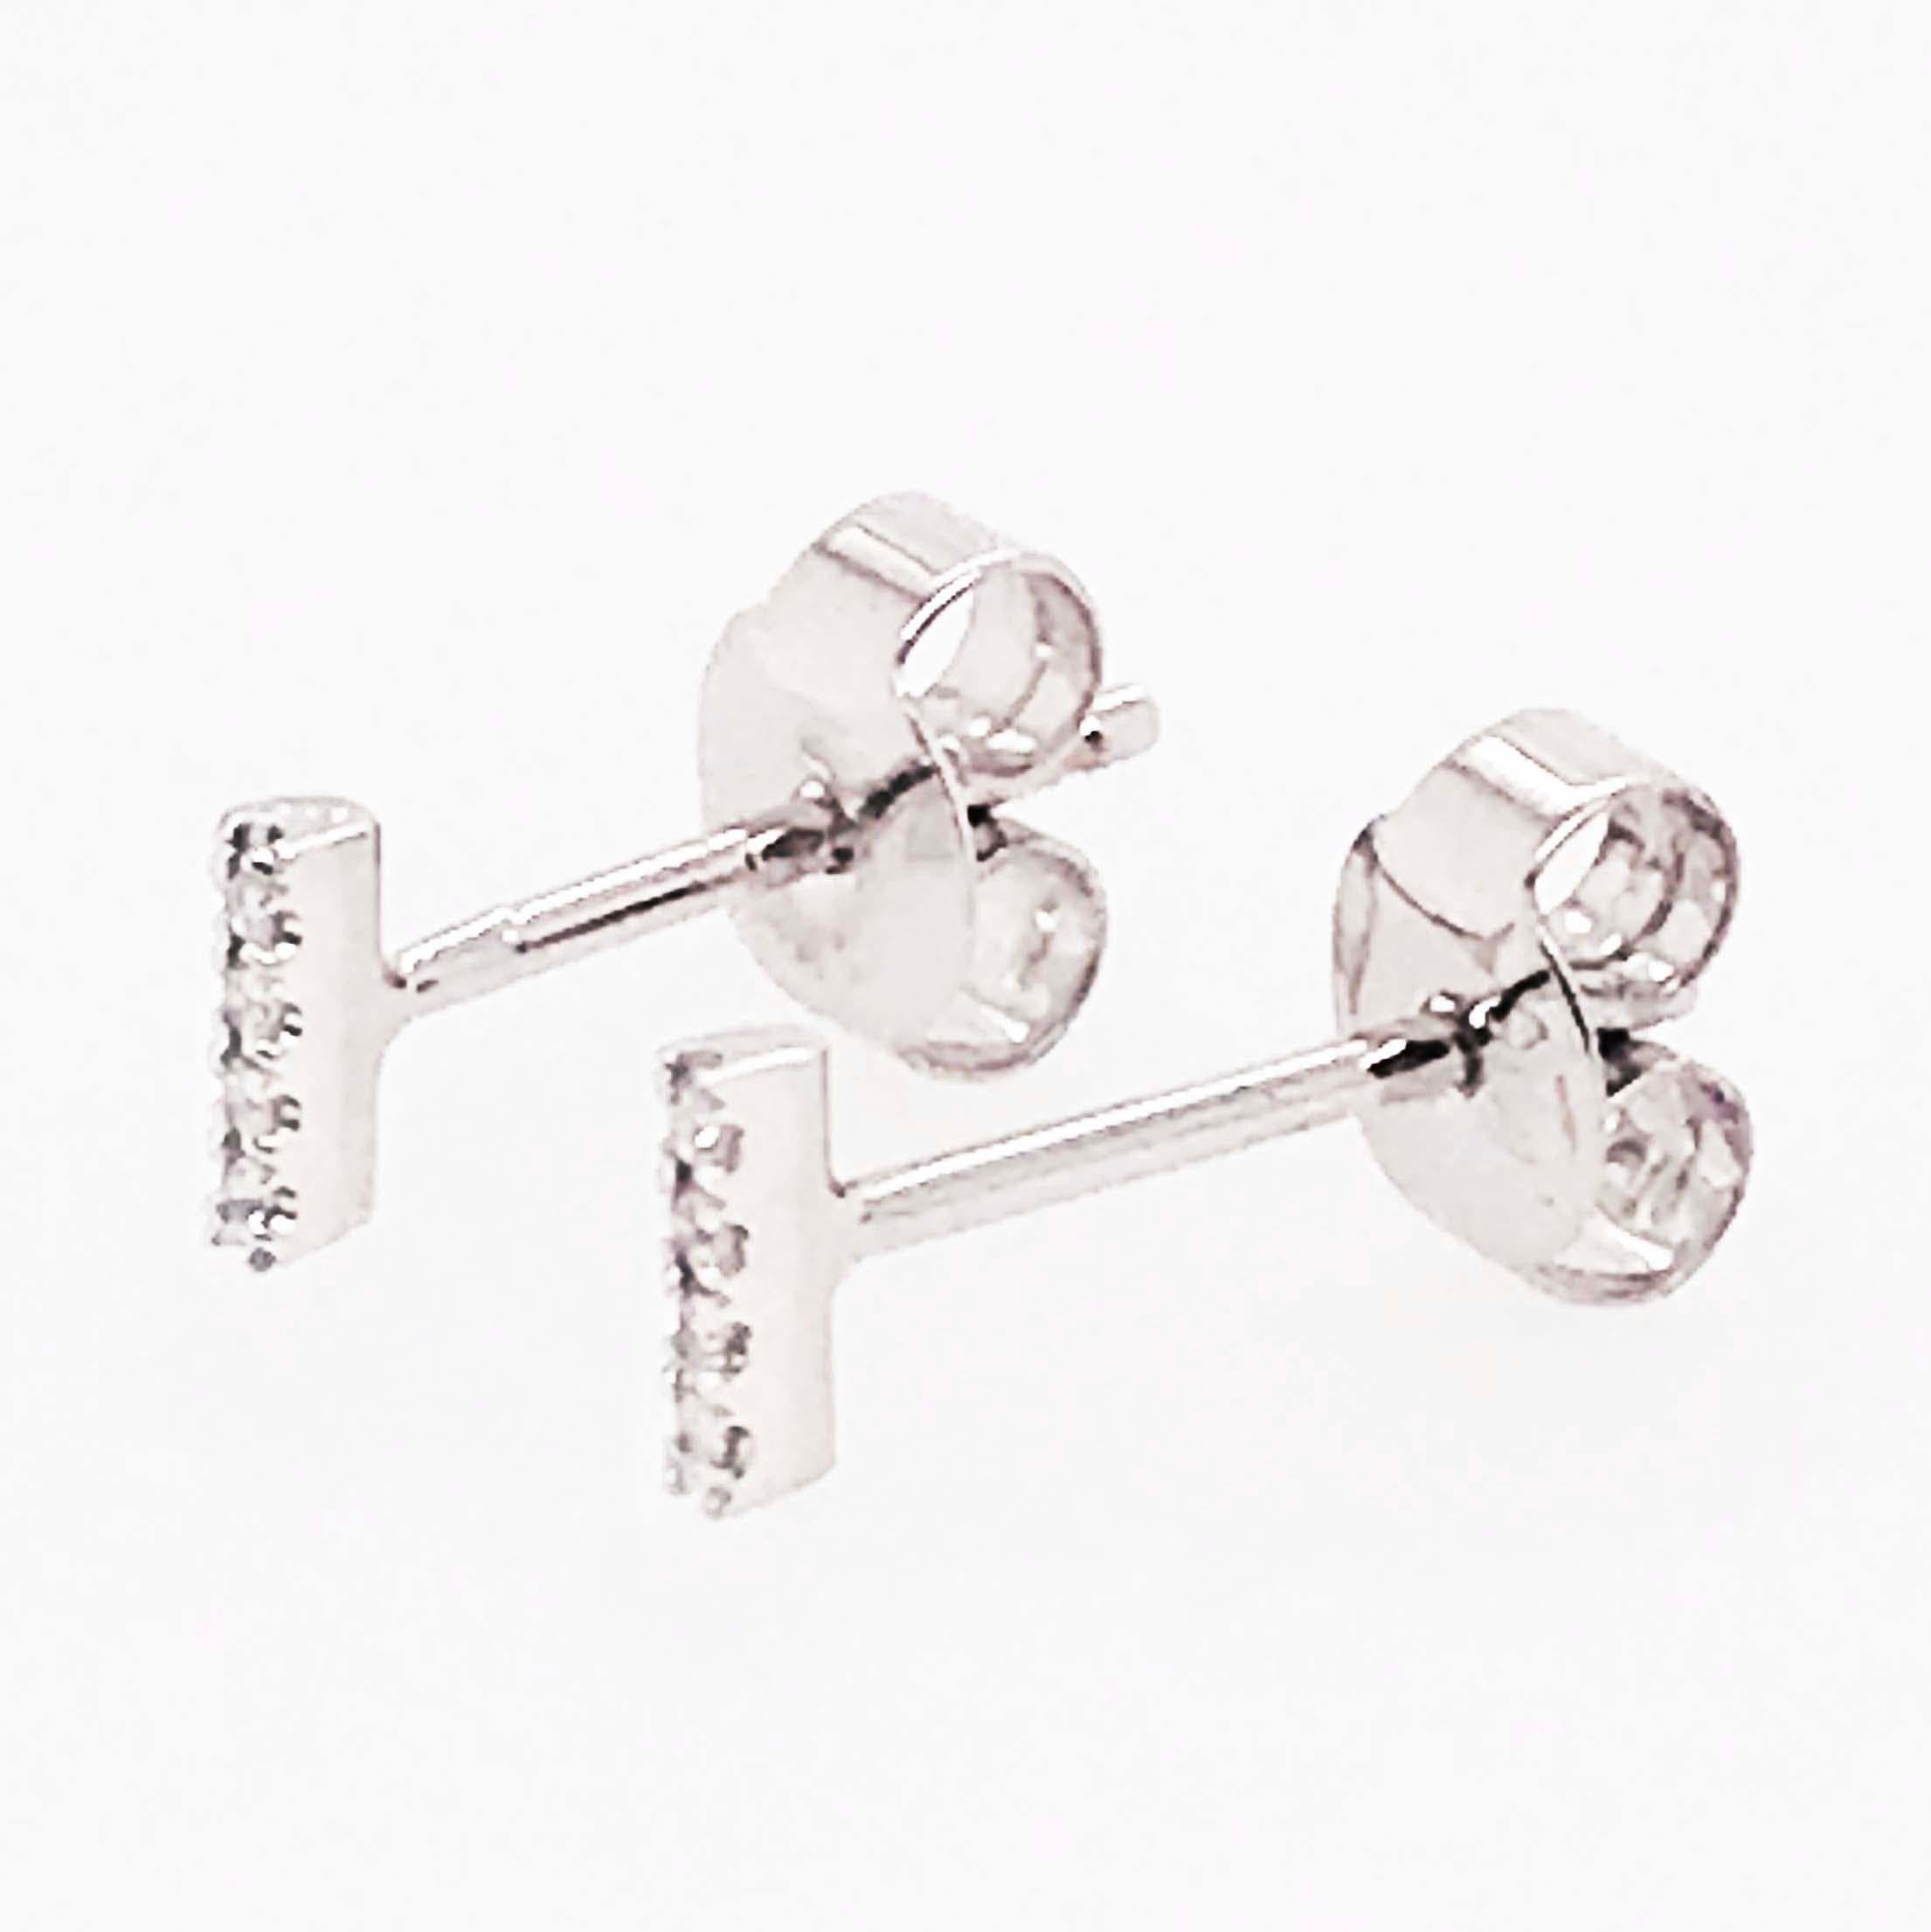 Pave Diamond Bar Earring Studs! Perfect for a custom stacking earring look or dainty solitaire look! These diamond earrings are versatile and look amazing on everyone! These diamond stud earrings have round brilliant diamonds set in a vertical bar